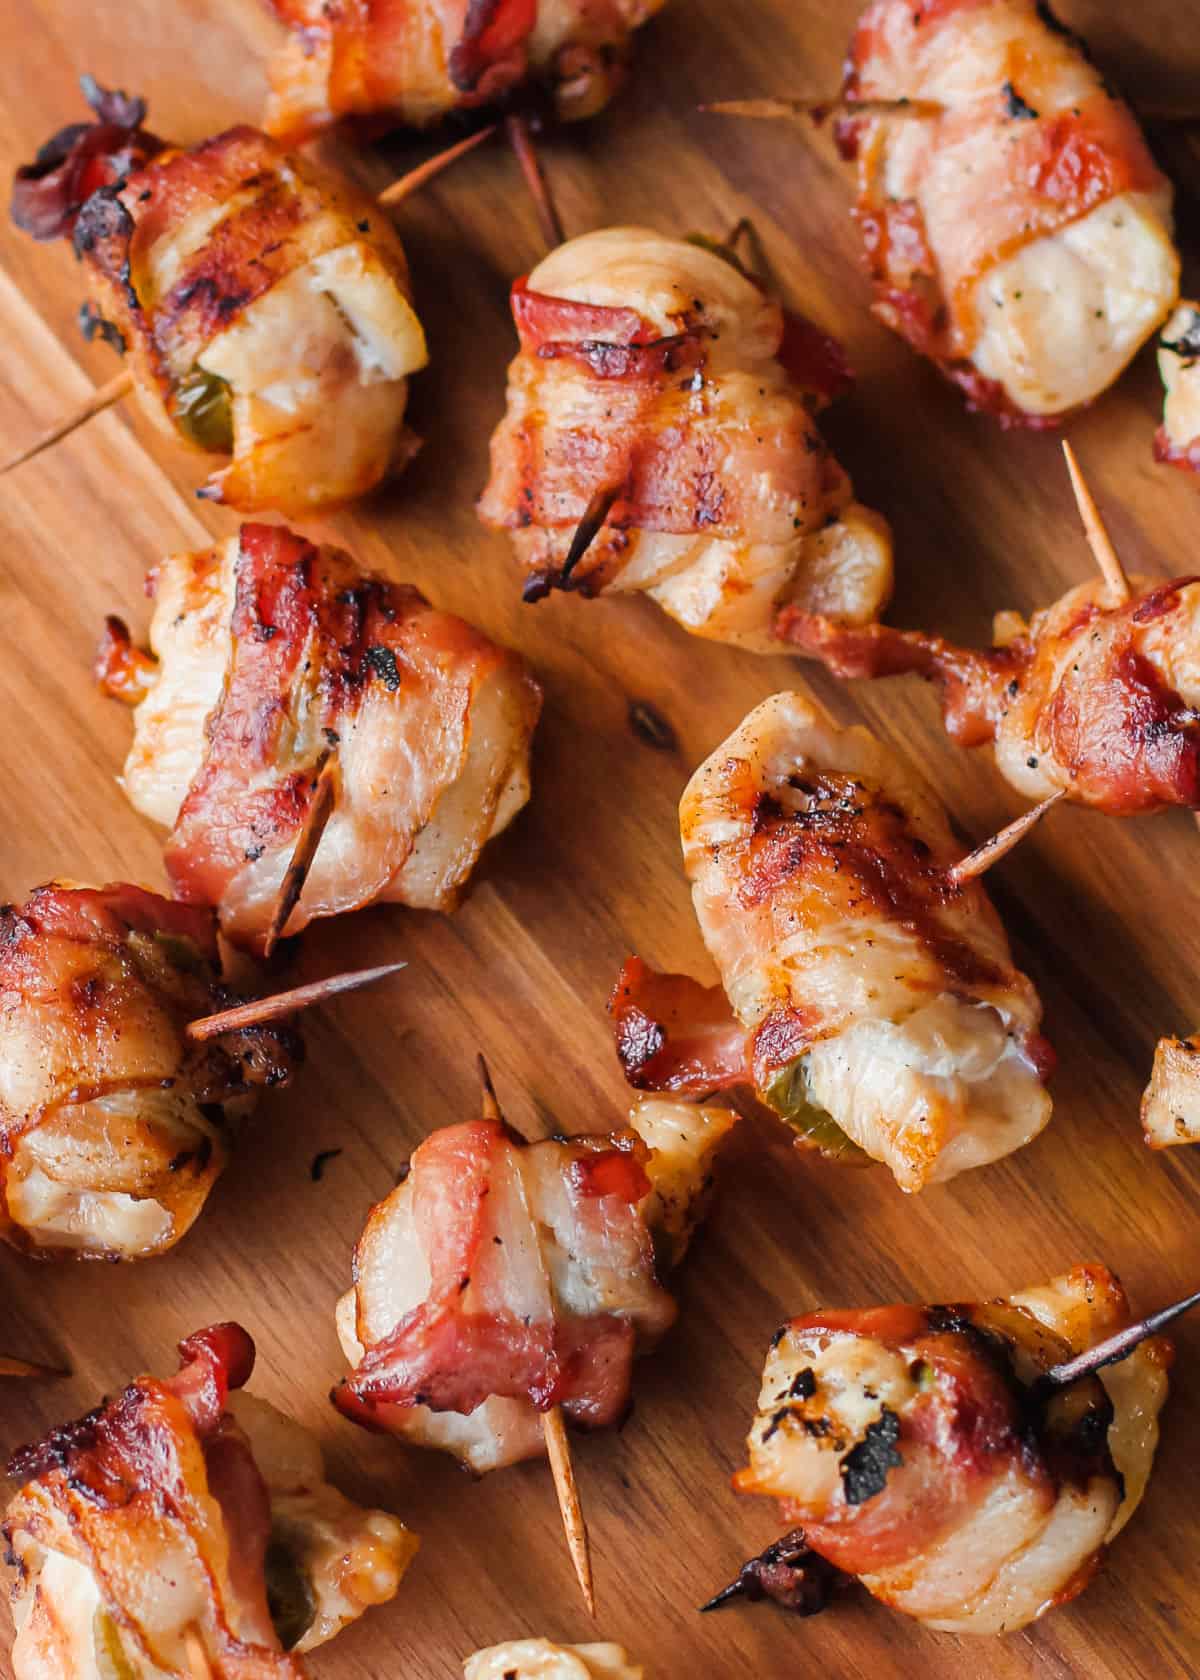 bacon wrapped chicken on toothpicks on wood board.